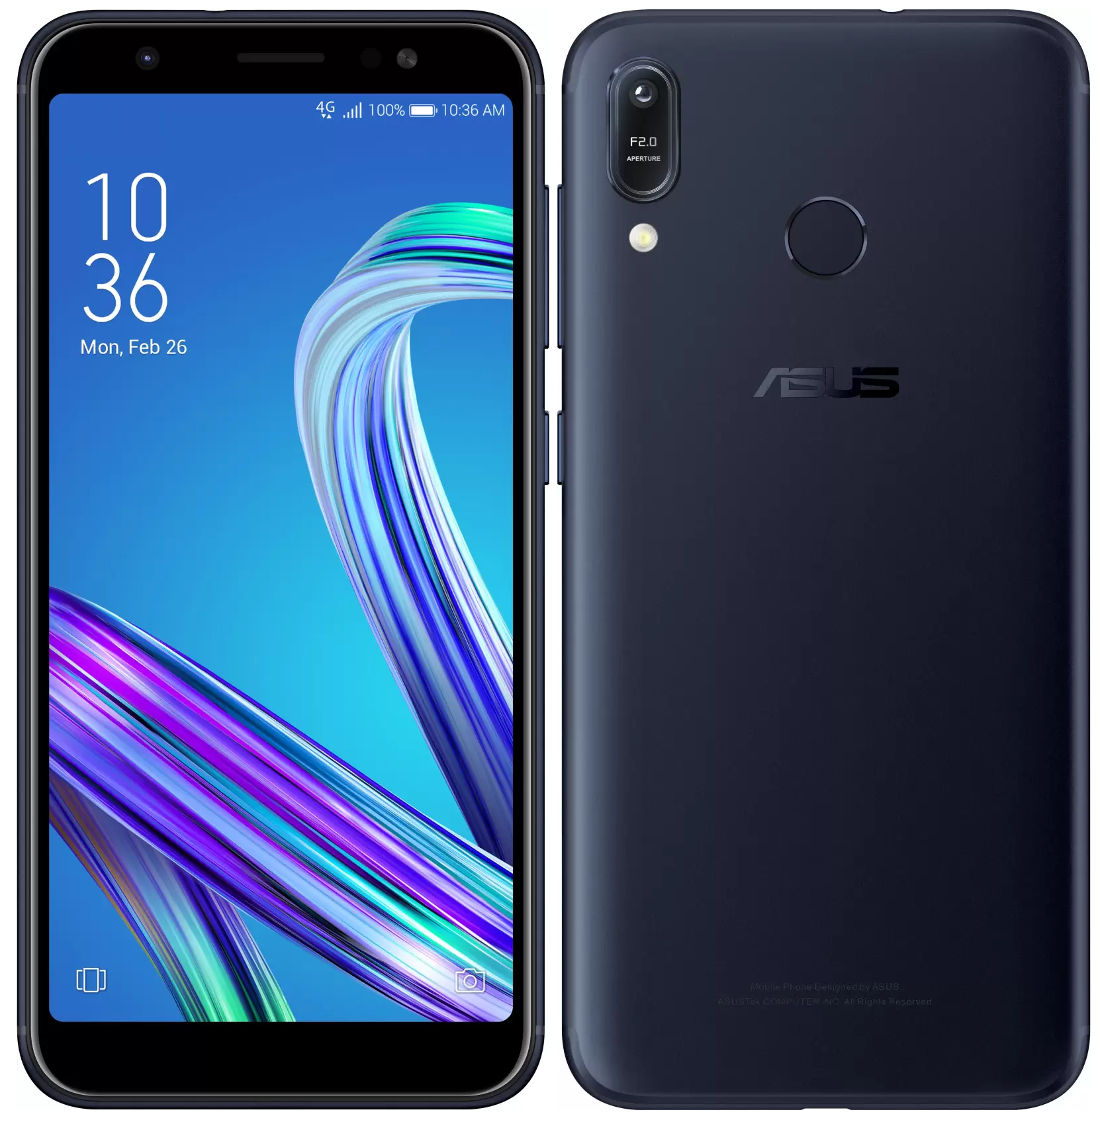 ASUS Zenfone Max M1 with 5.45-inch 18:9 display, 4000mAh battery 